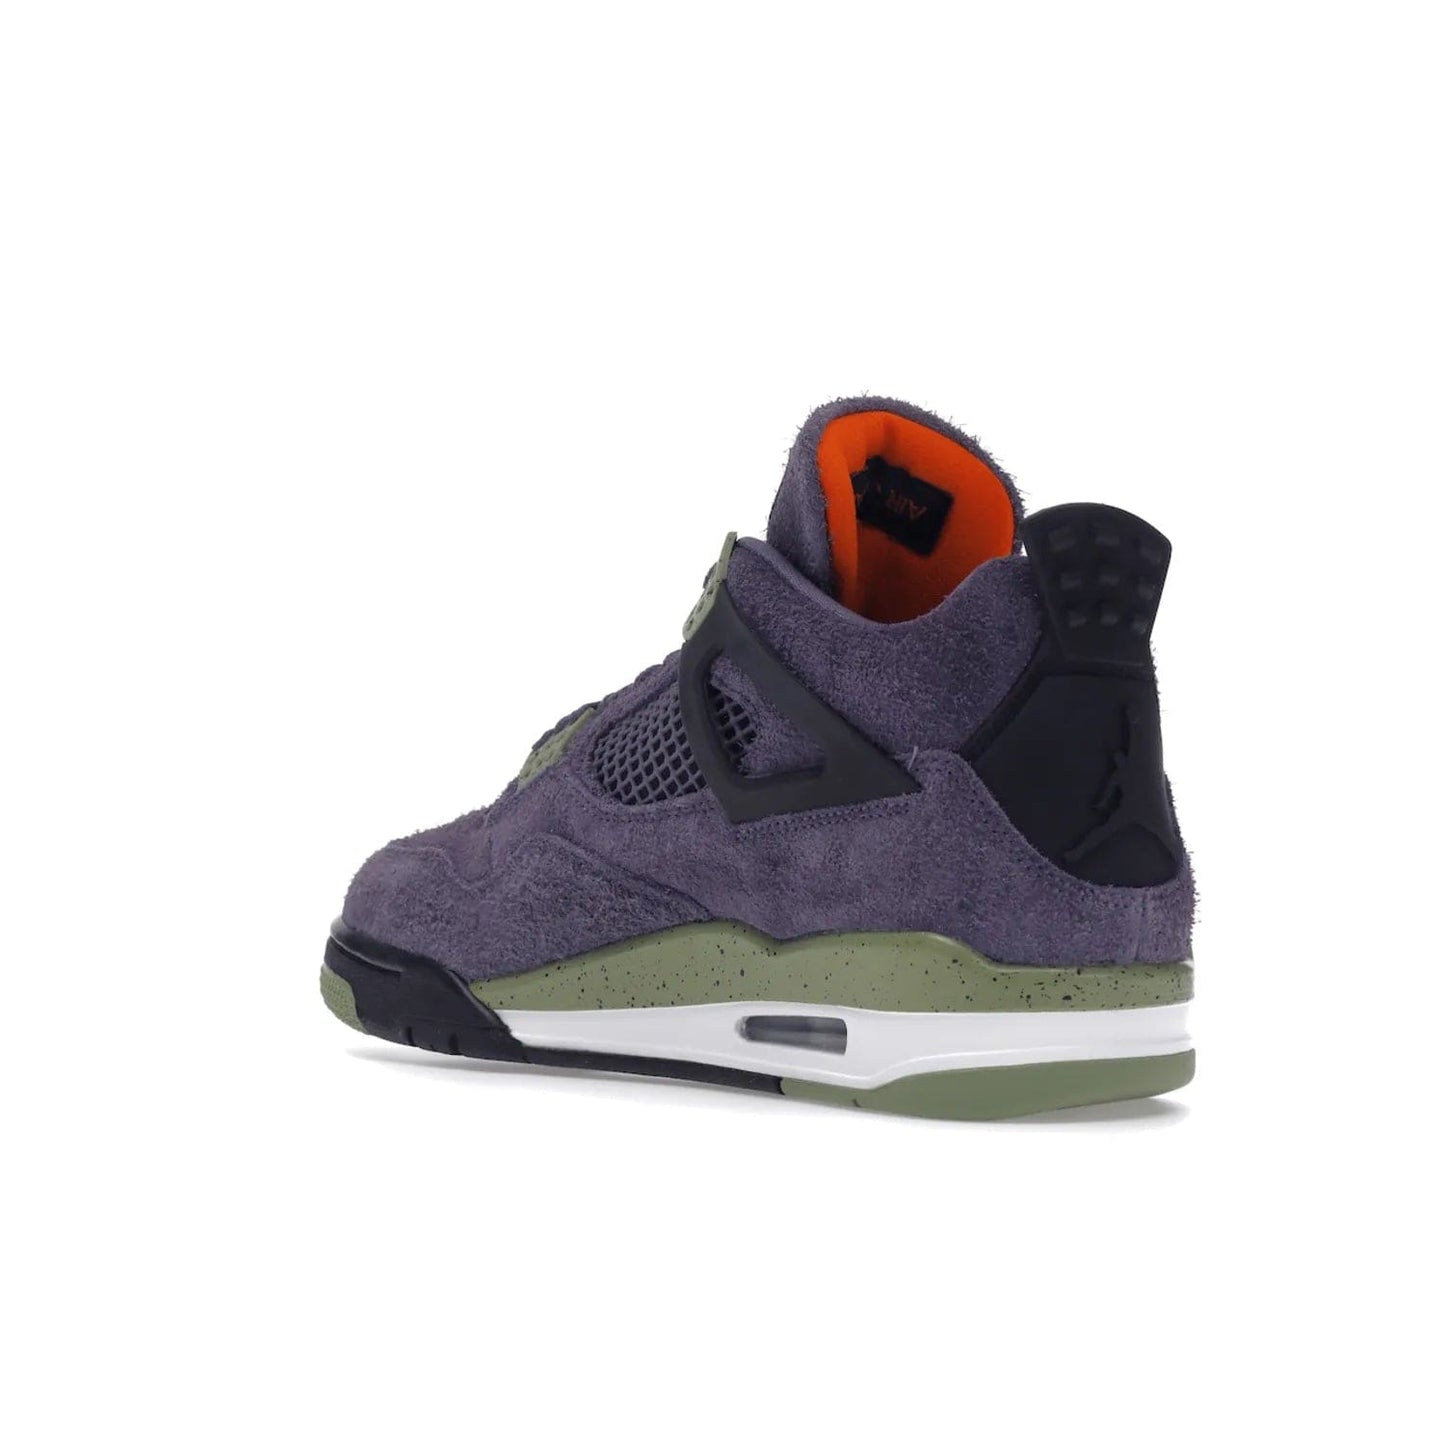 Jordan 4 Retro Canyon Purple (Women's) - Image 24 - Only at www.BallersClubKickz.com - New Air Jordan 4 Retro Canyon Purple W sneaker features shaggy purple suede, lime highlights & safety orange Jumpman branding. Classic ankle-hugging silhouette with modern colors released 15/10/2022.